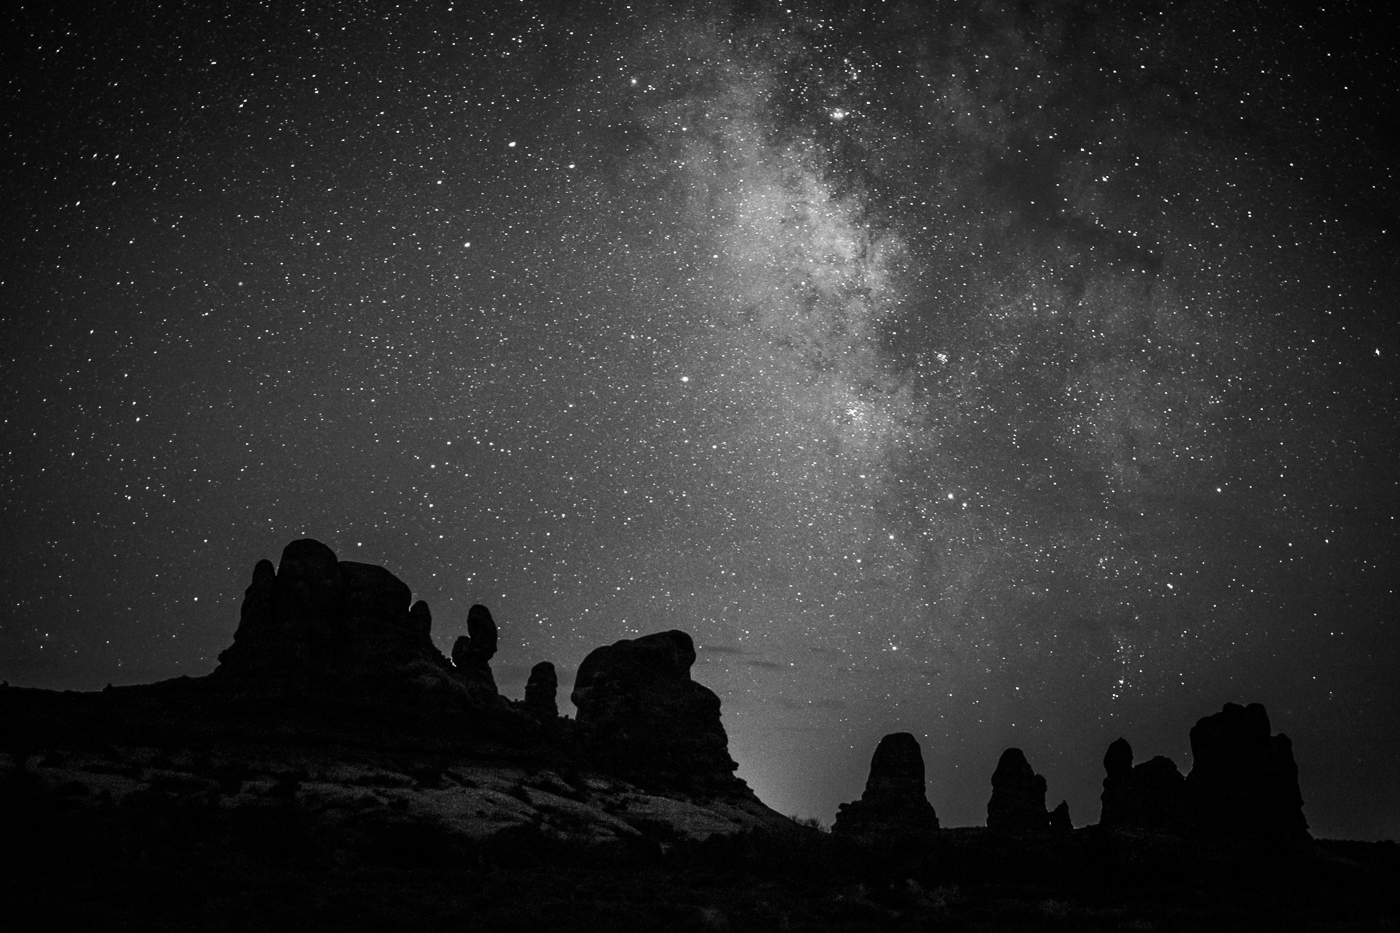 Milky Way at Arches National Park, Utah, USA on northtosouth.us